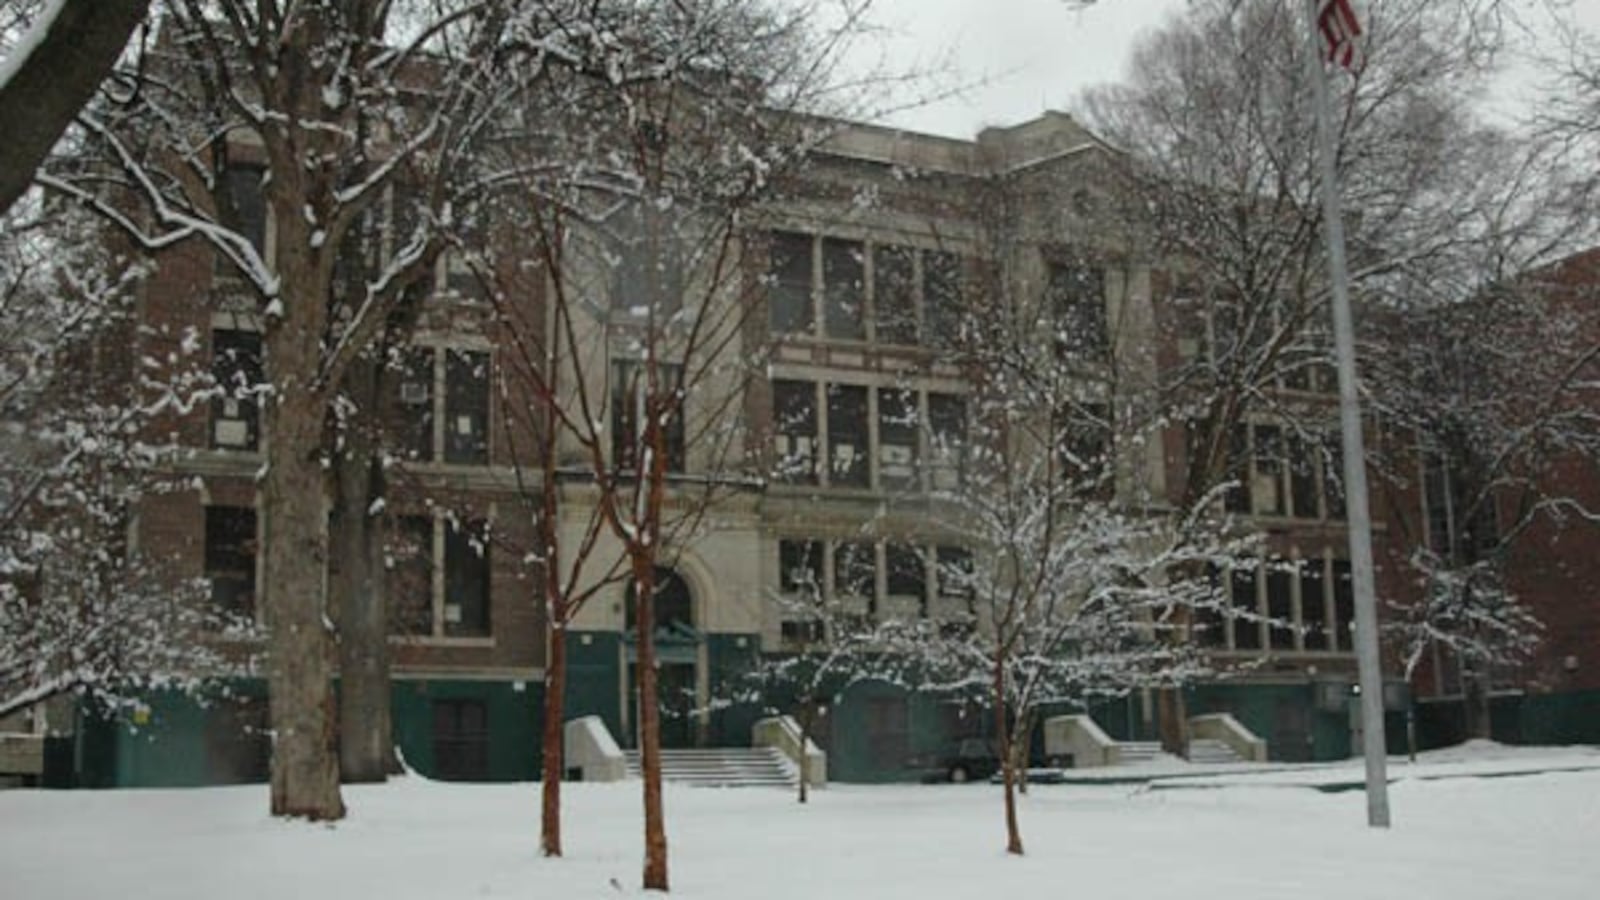 Exterior of Germantown High in the winter snow.